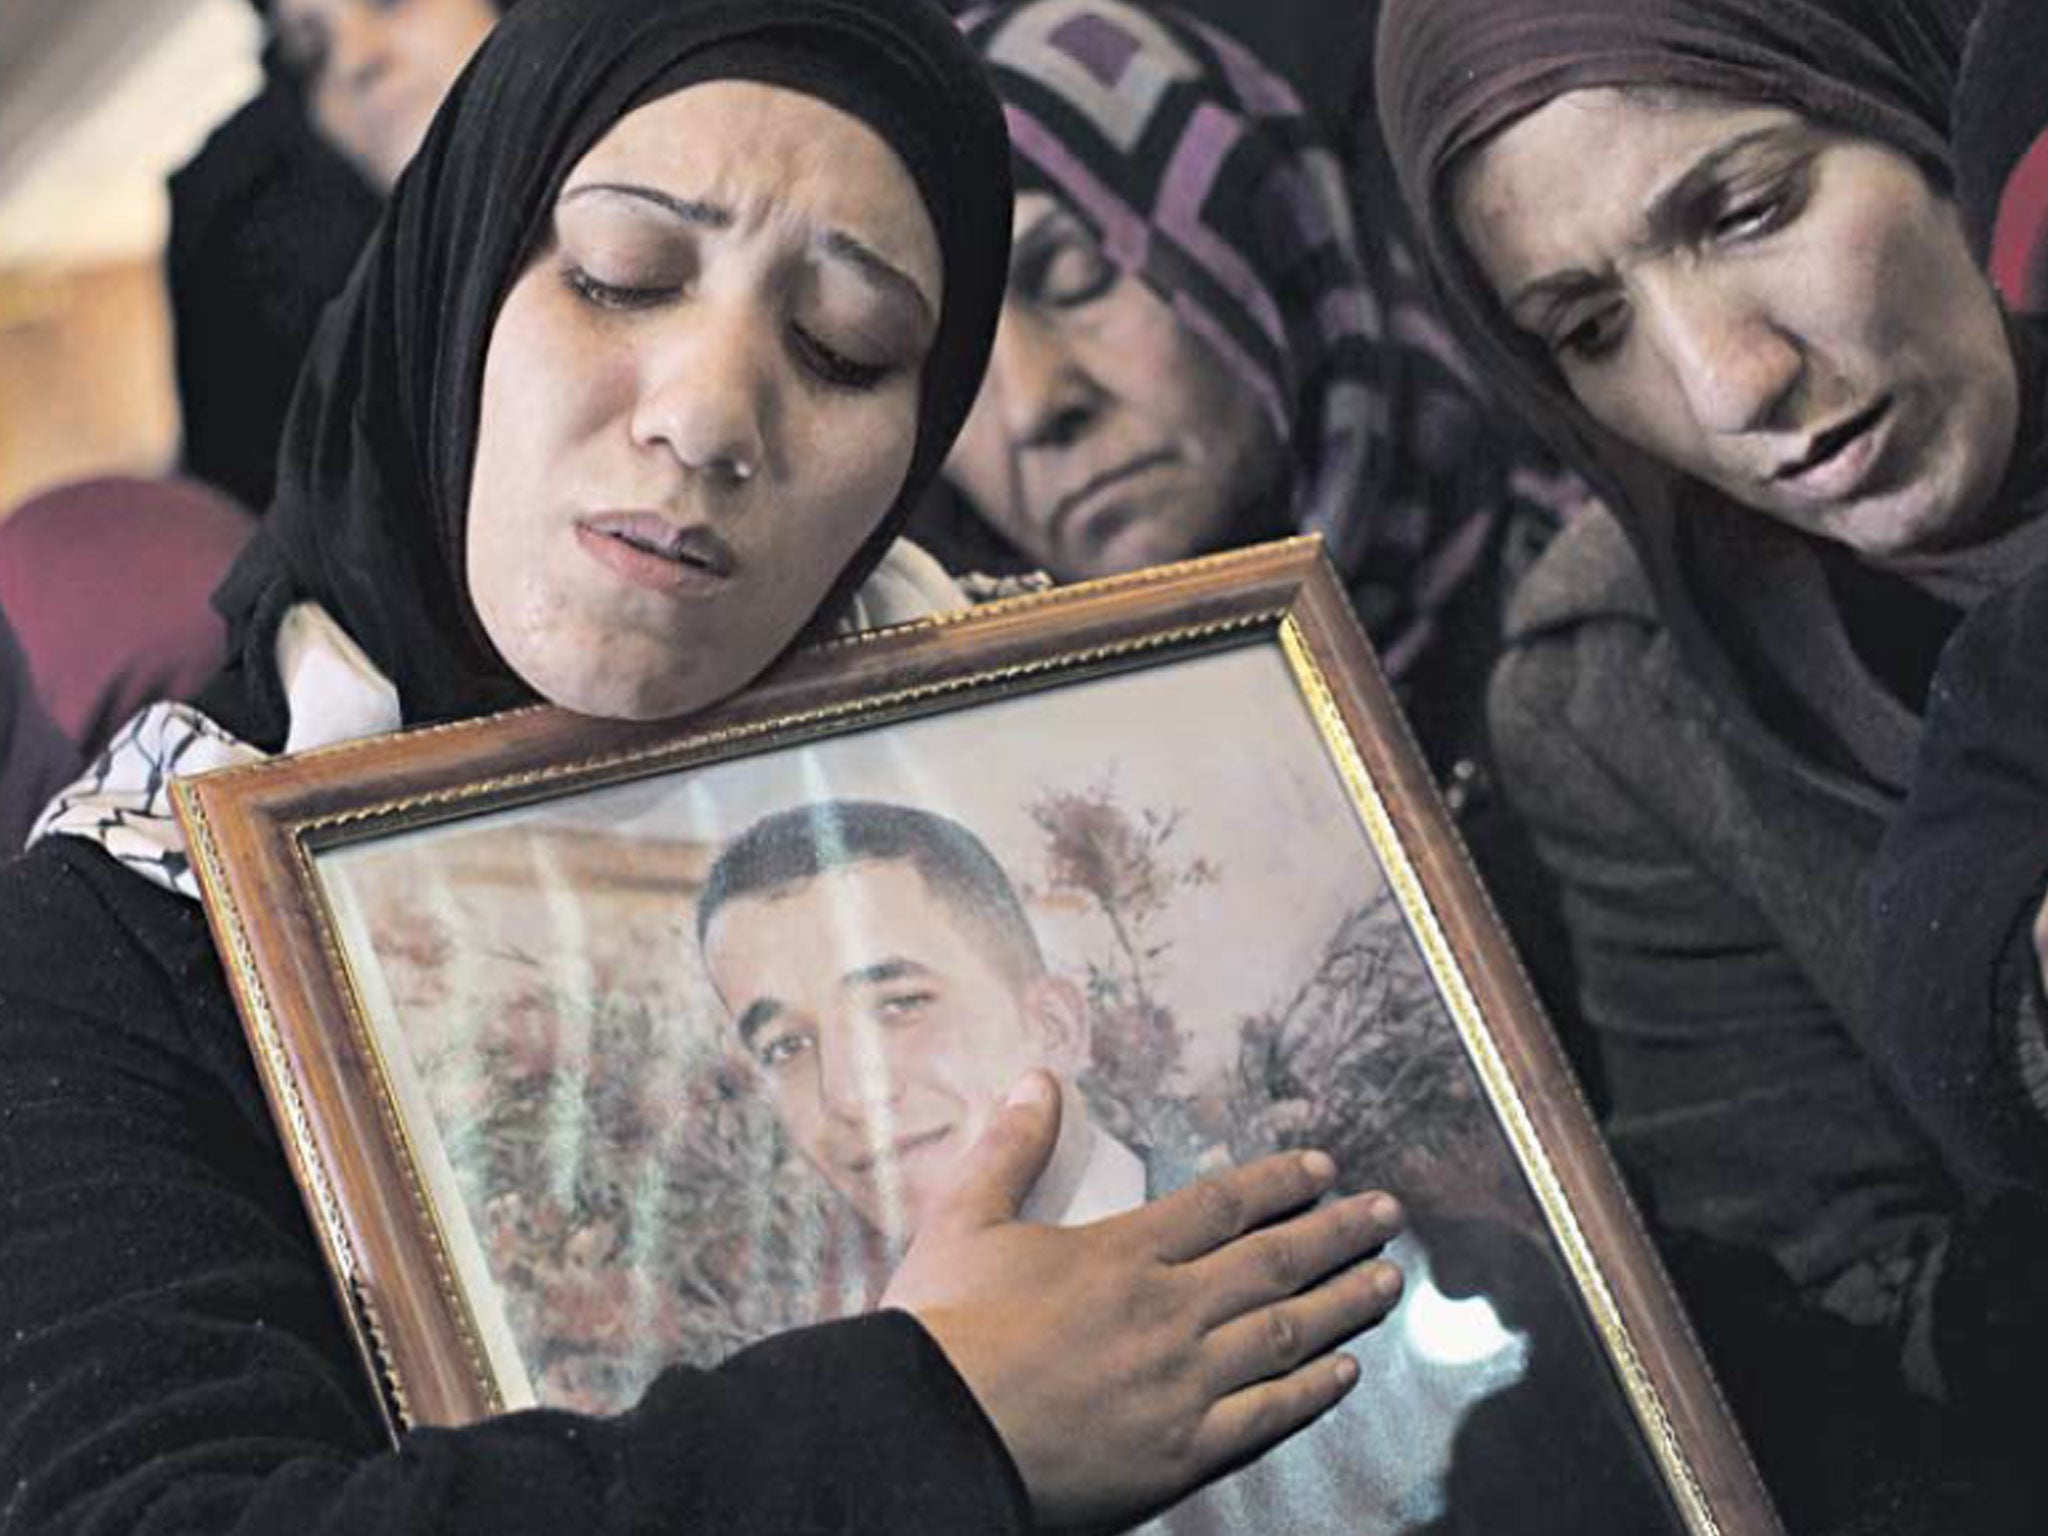 Palestinian women mourn at the funeral of Arafat Jaradat in the
West Bank town of Si’ir, near Hebron